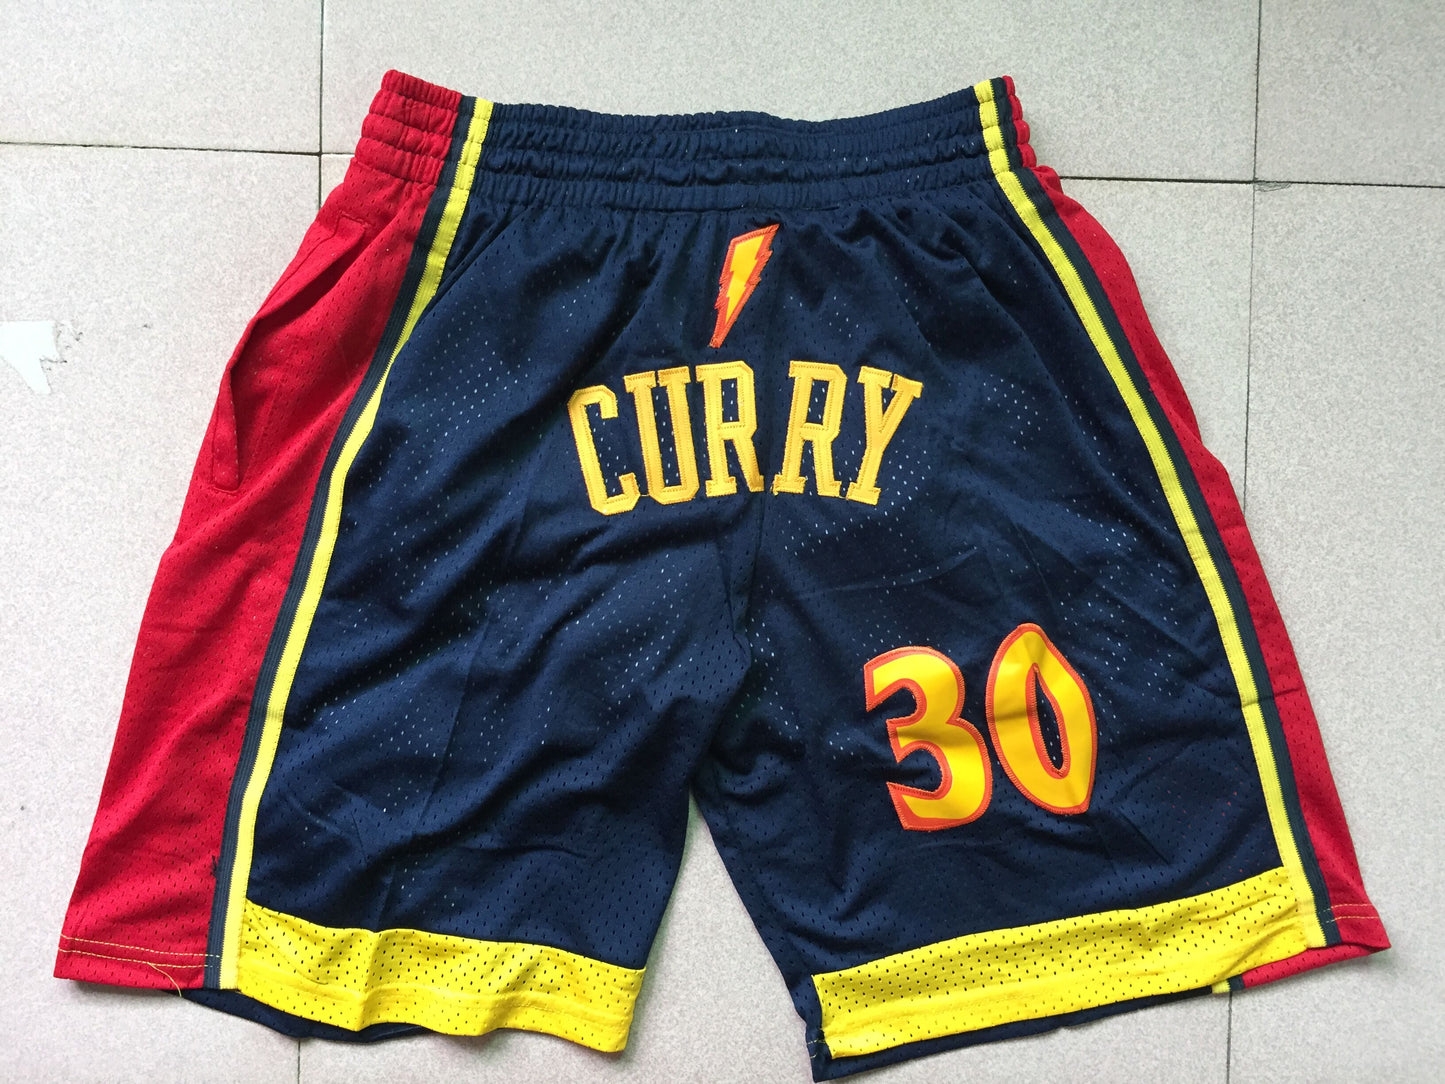 Just Don - Golden State Warriors (Curry) Championship Blue Retro